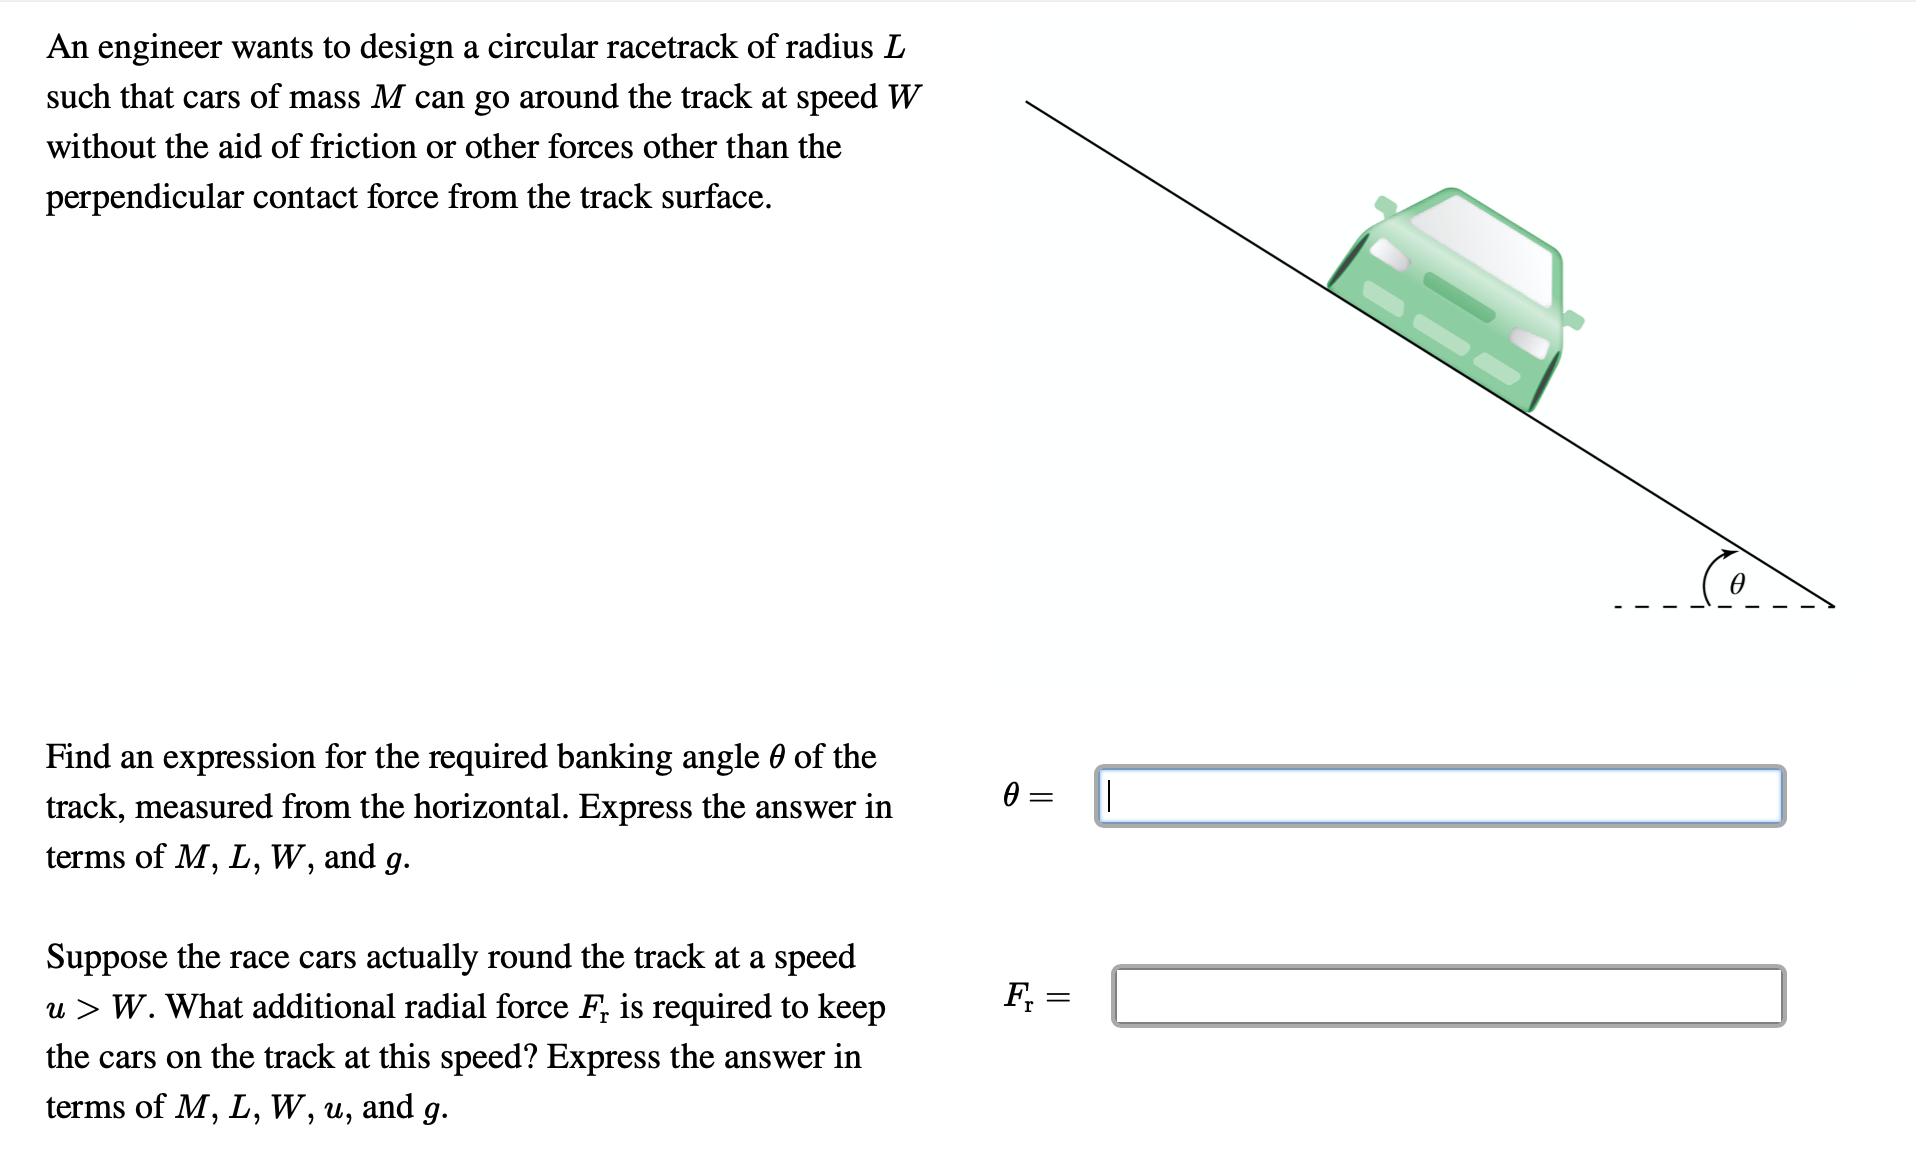 An engineer wants to design a circular racetrack of radius L
such that cars of mass M can go around the track at speed W
without the aid of friction or other forces other than the
perpendicular contact force from the track surface.
Find an expression for the required banking angle 0 of the
track, measured from the horizontal. Express the answer in
terms of M, L, W, and g.
Suppose the race cars actually round the track at a speed
u > W. What additional radial force F, is required to keep
F, =
the cars on the track at this speed? Express the answer in
terms of M, L, W, u, and g.
||
